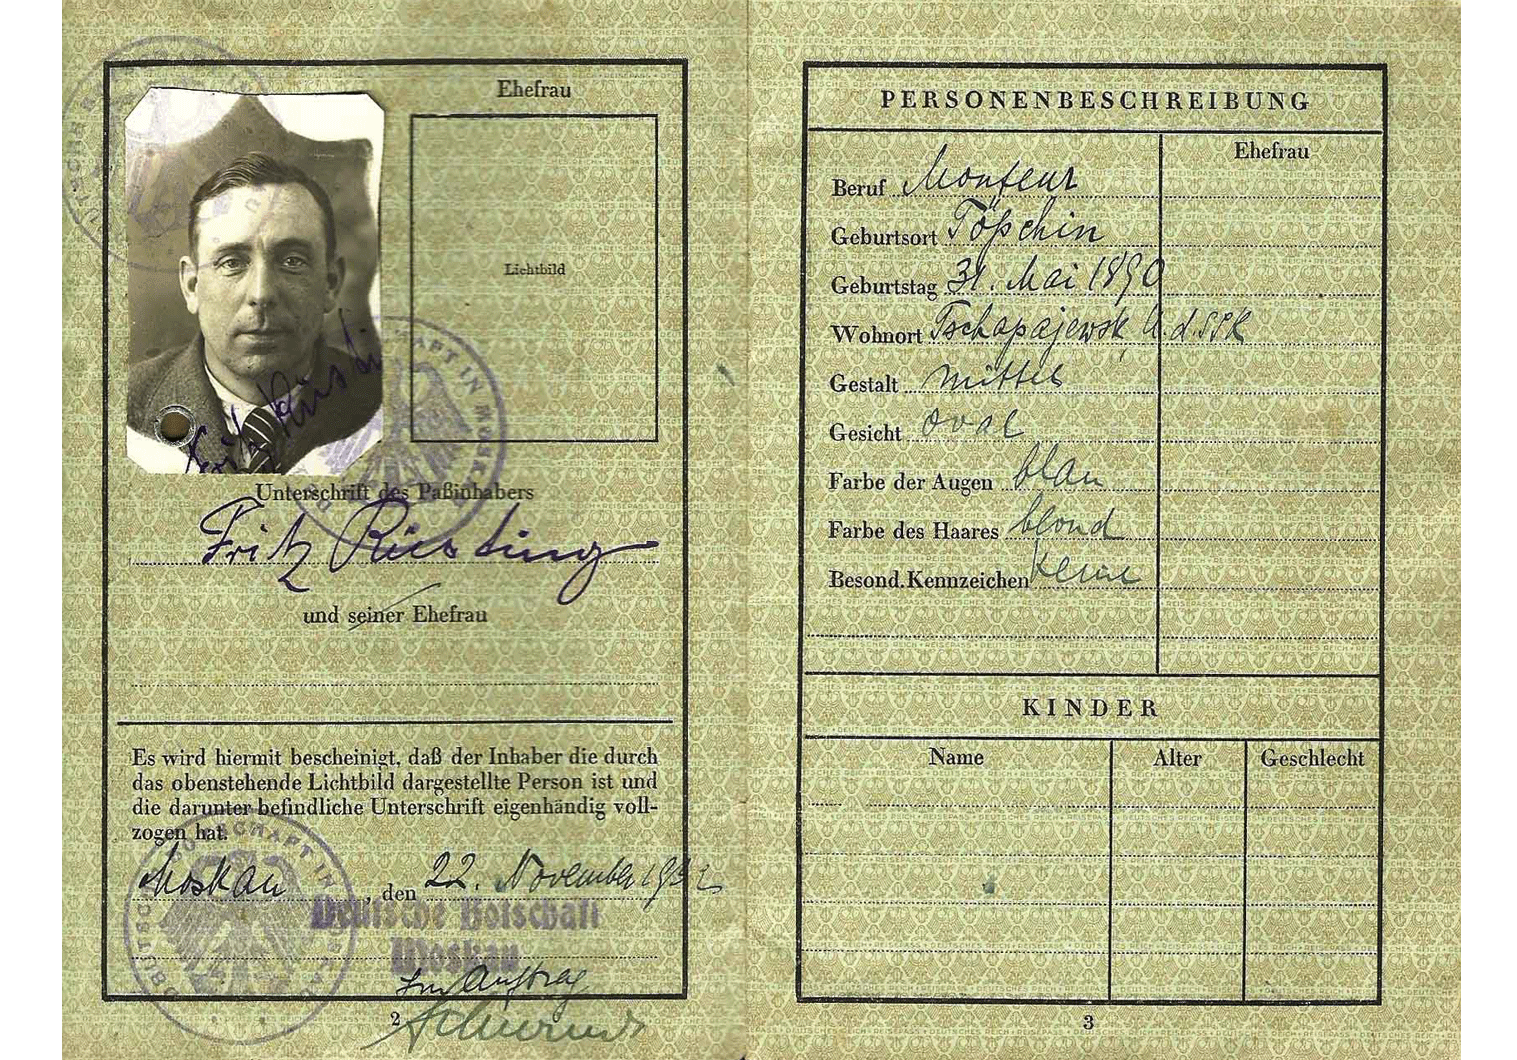 Moscow 1932 issued German passport